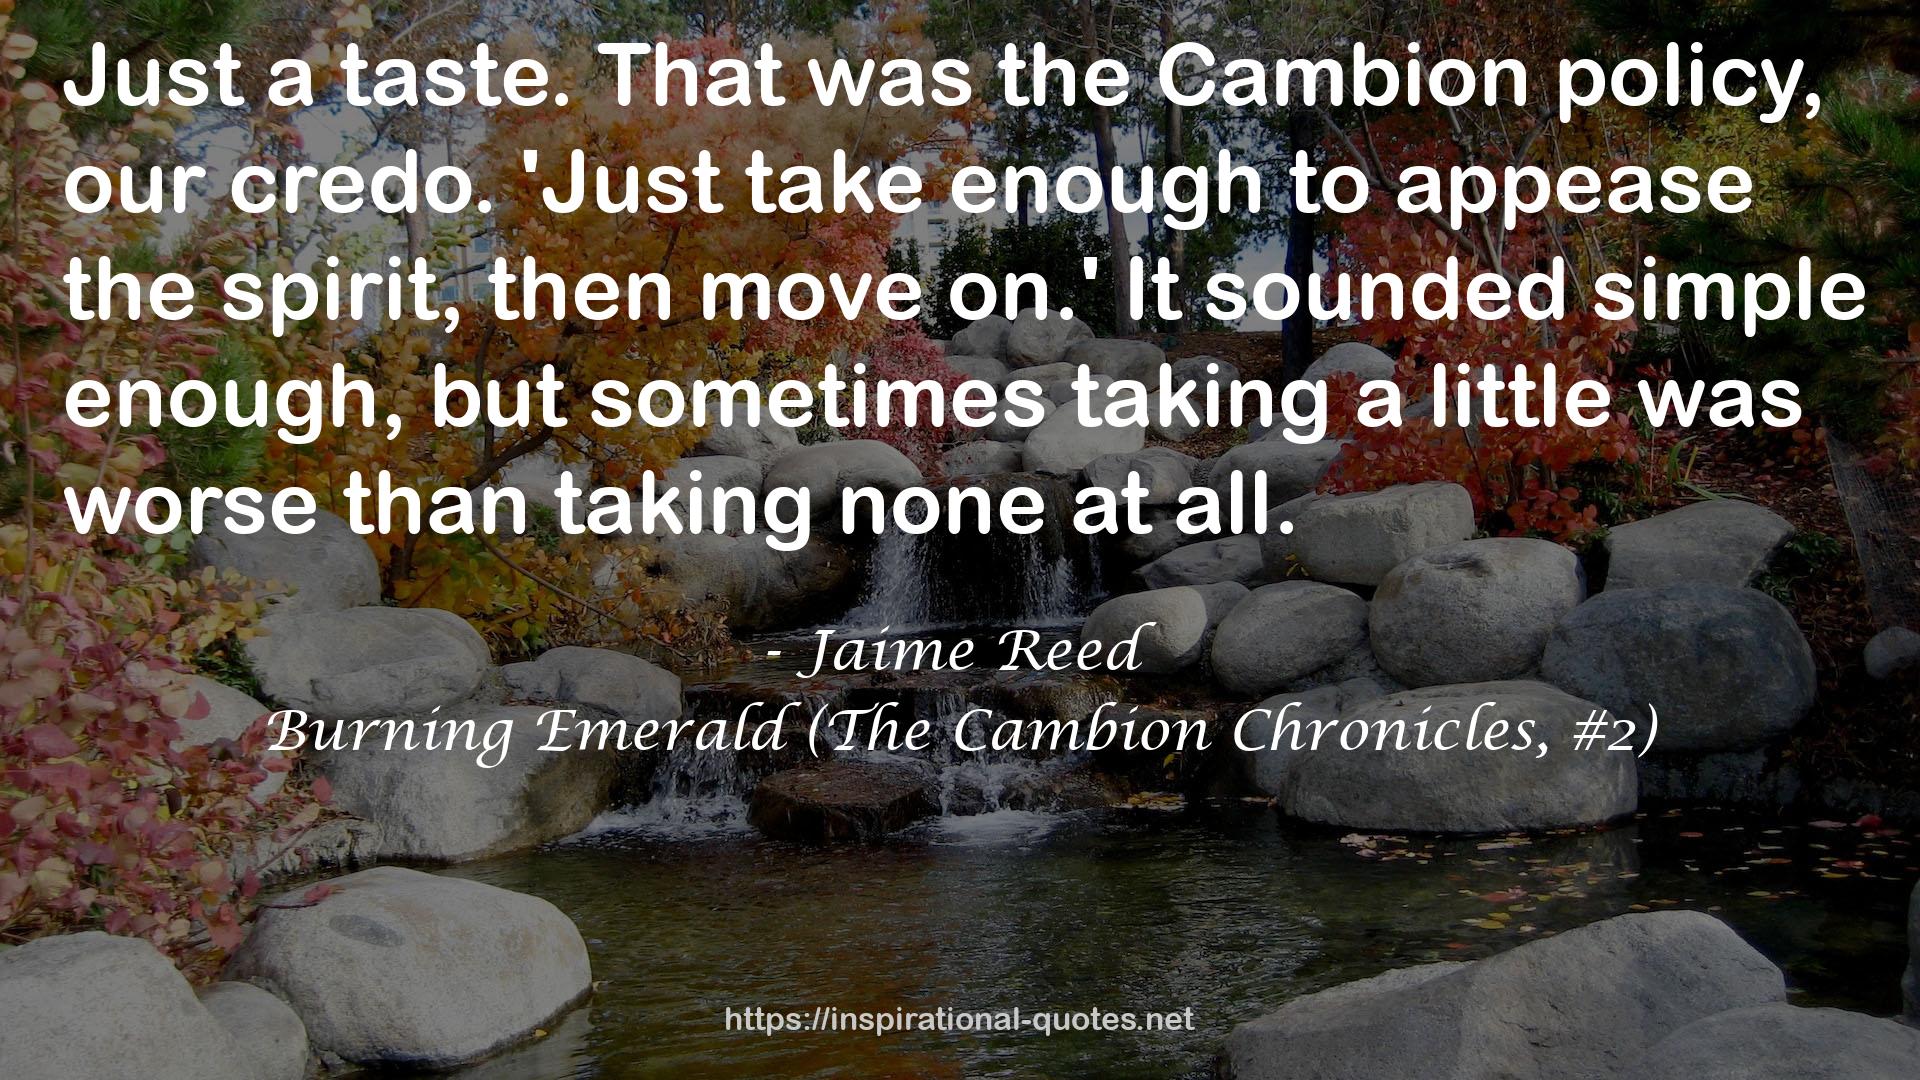 Burning Emerald (The Cambion Chronicles, #2) QUOTES